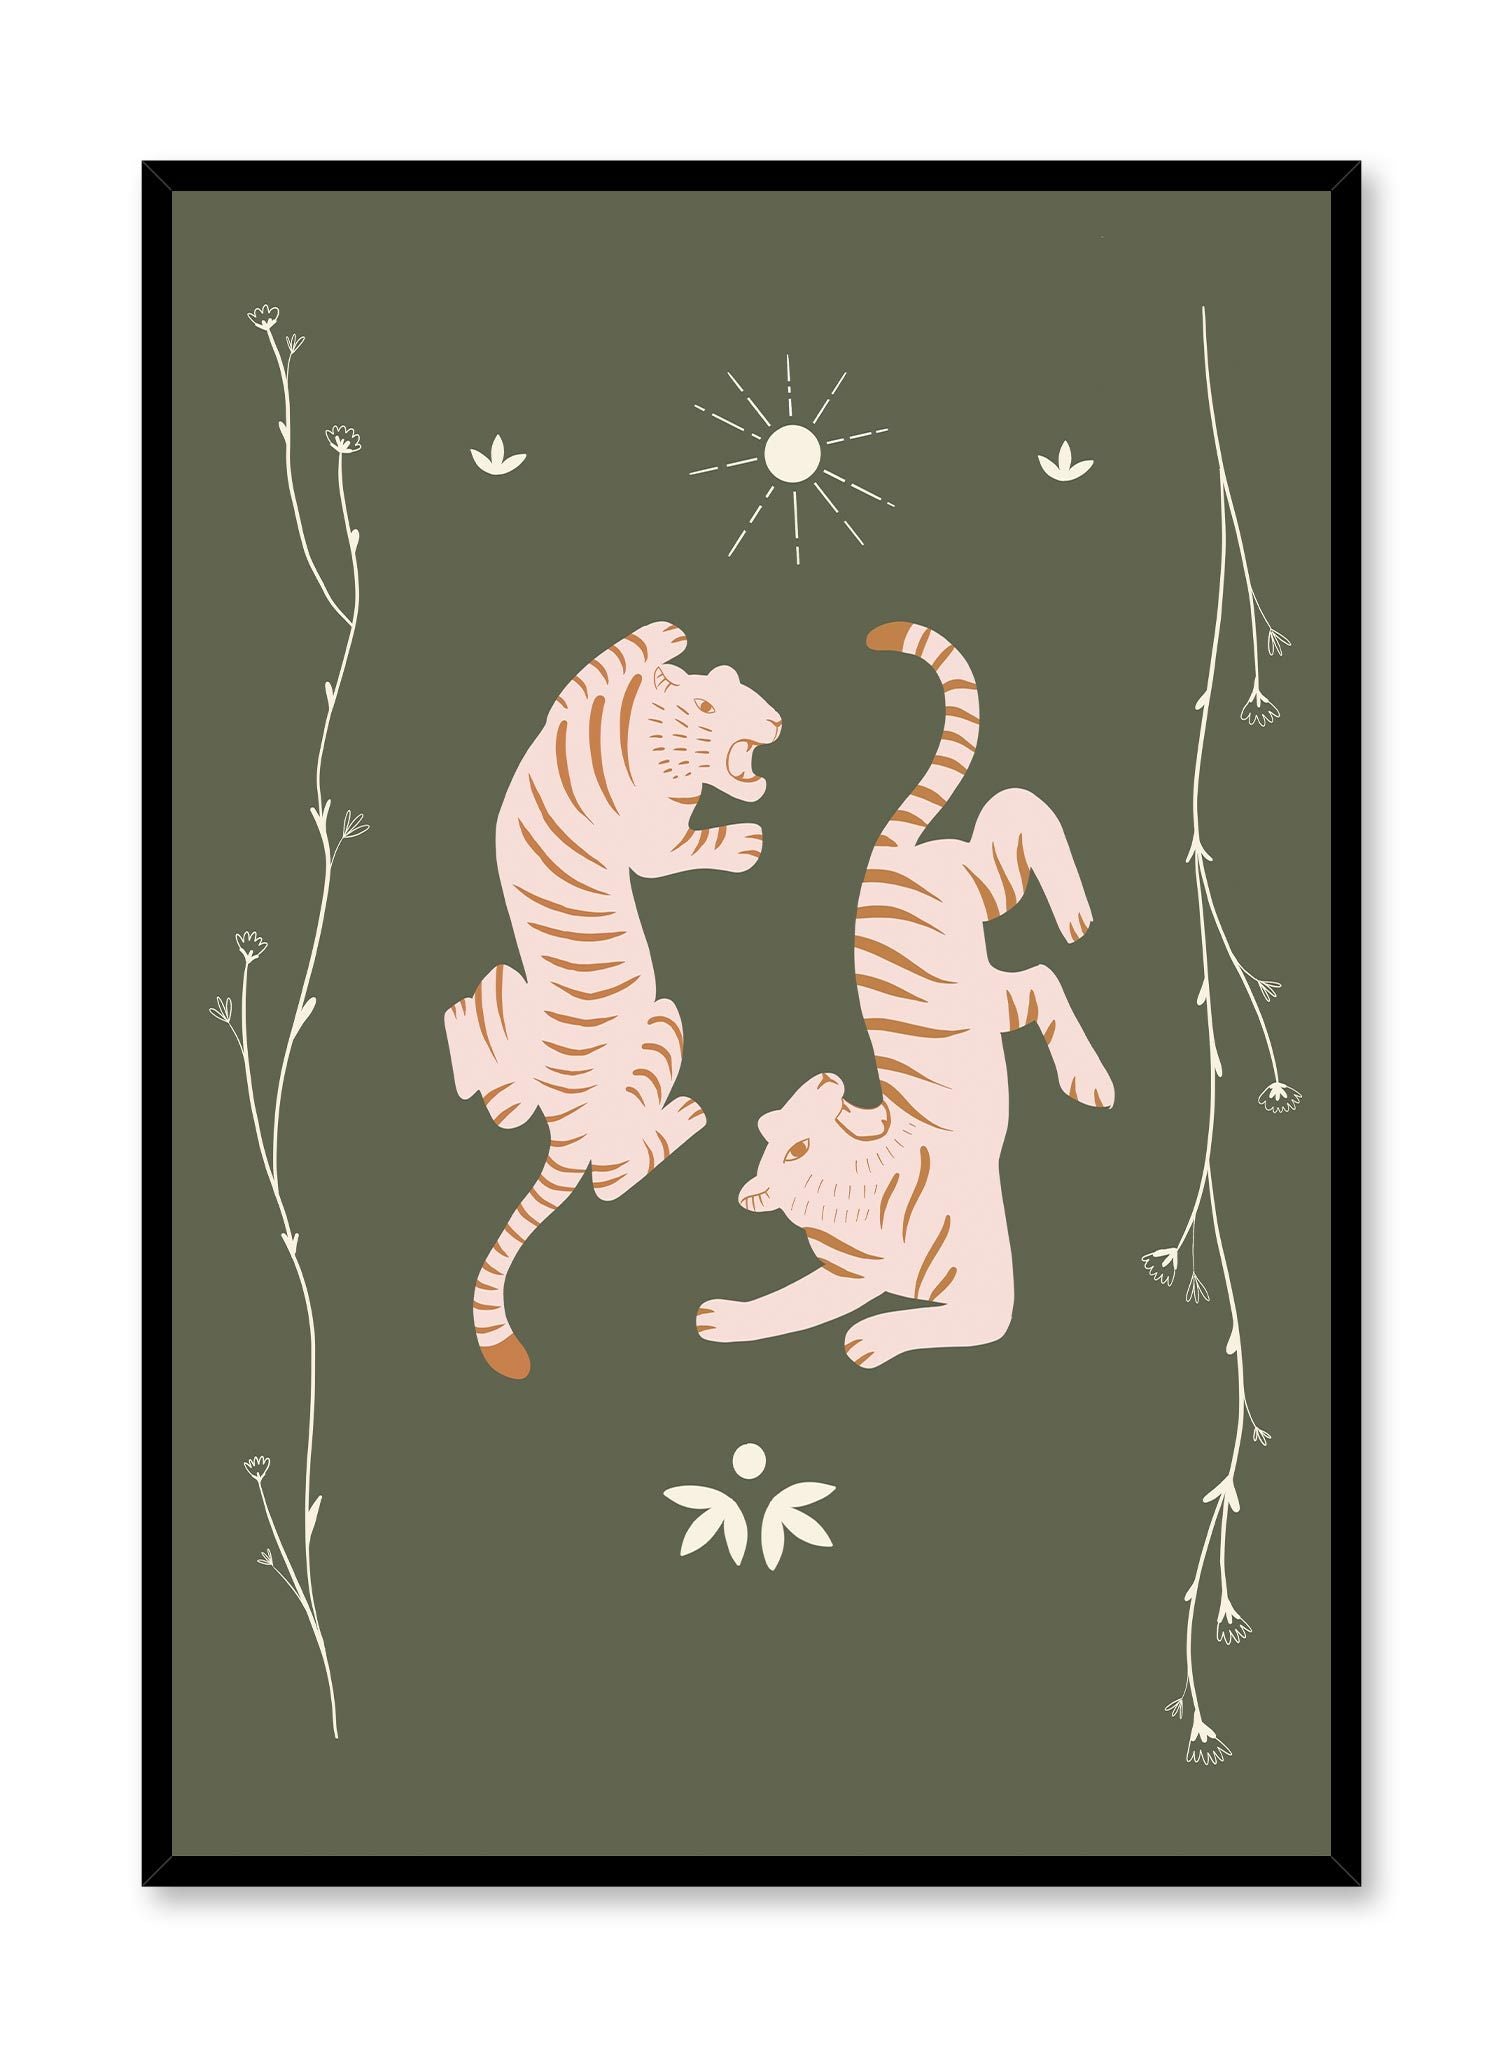 Tiger Team is a minimalist illustration of a pair of pink tiger twins with orange stripes standing in opposite direction roaring to show their dominance by Opposite Wall.